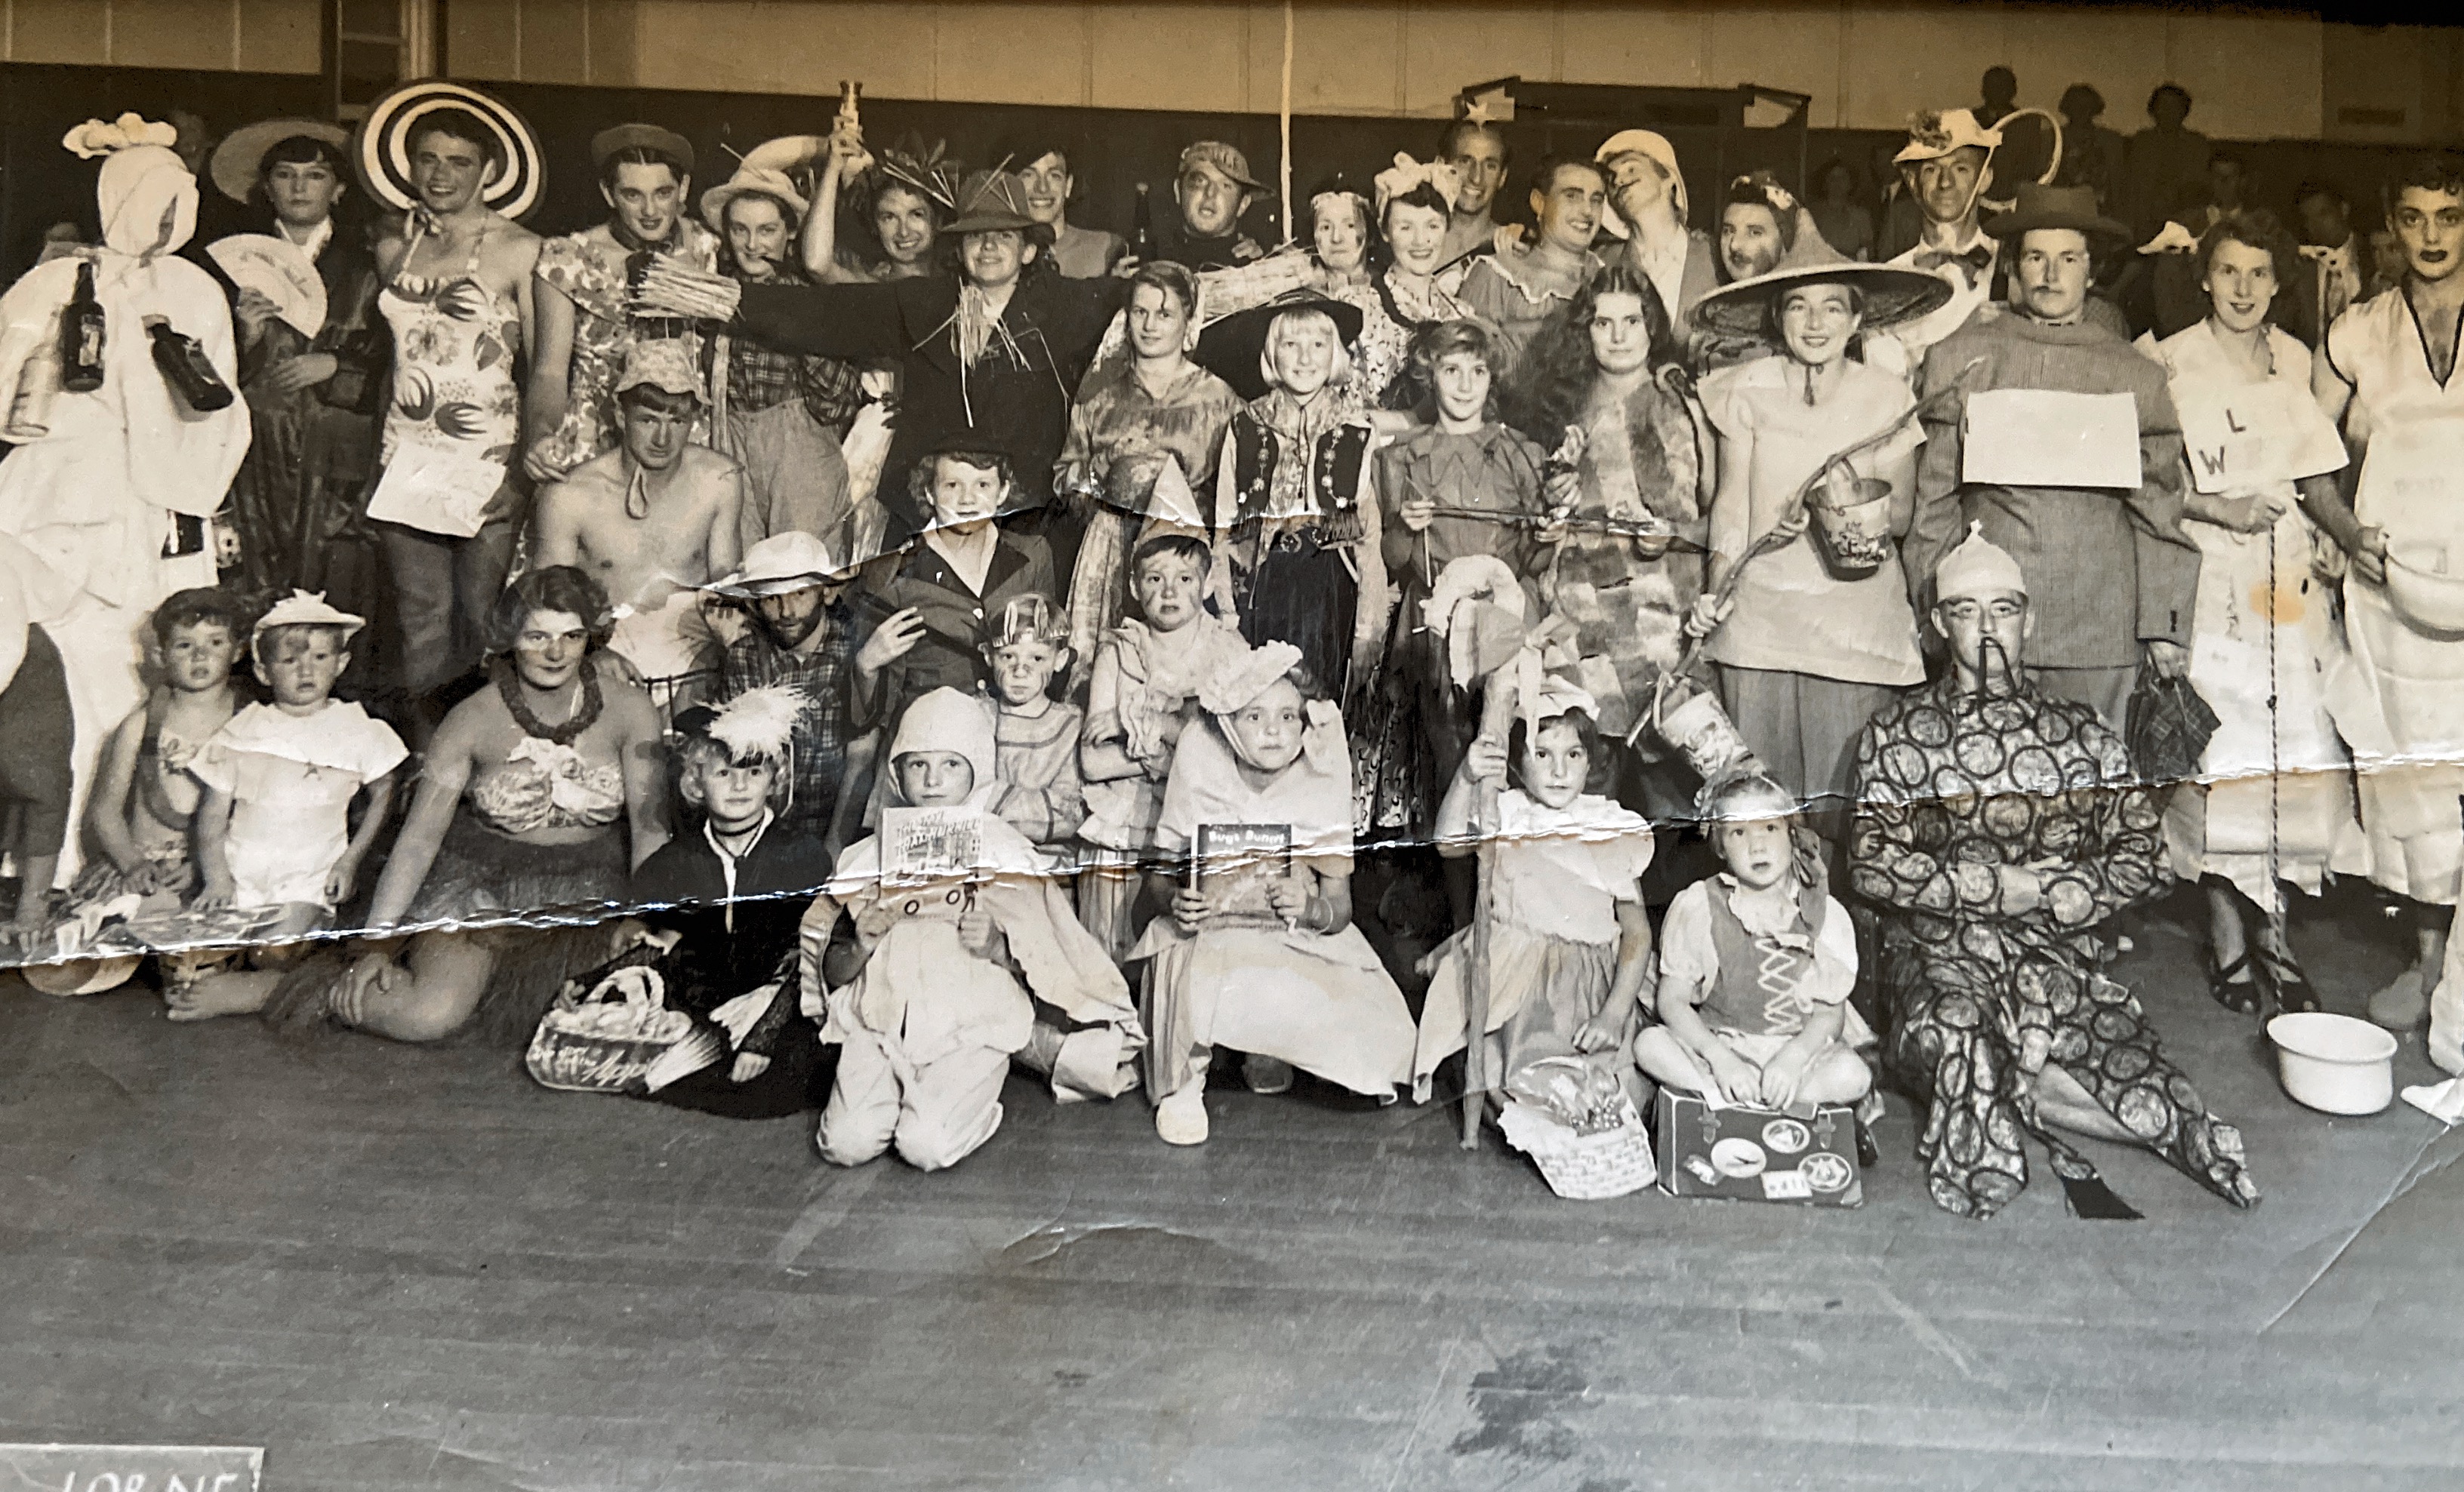 Fancy dress I’m in the front as little bow peep my mum is the scarecrow and dad is a fairy at the back 1952
Kia Ora guest house